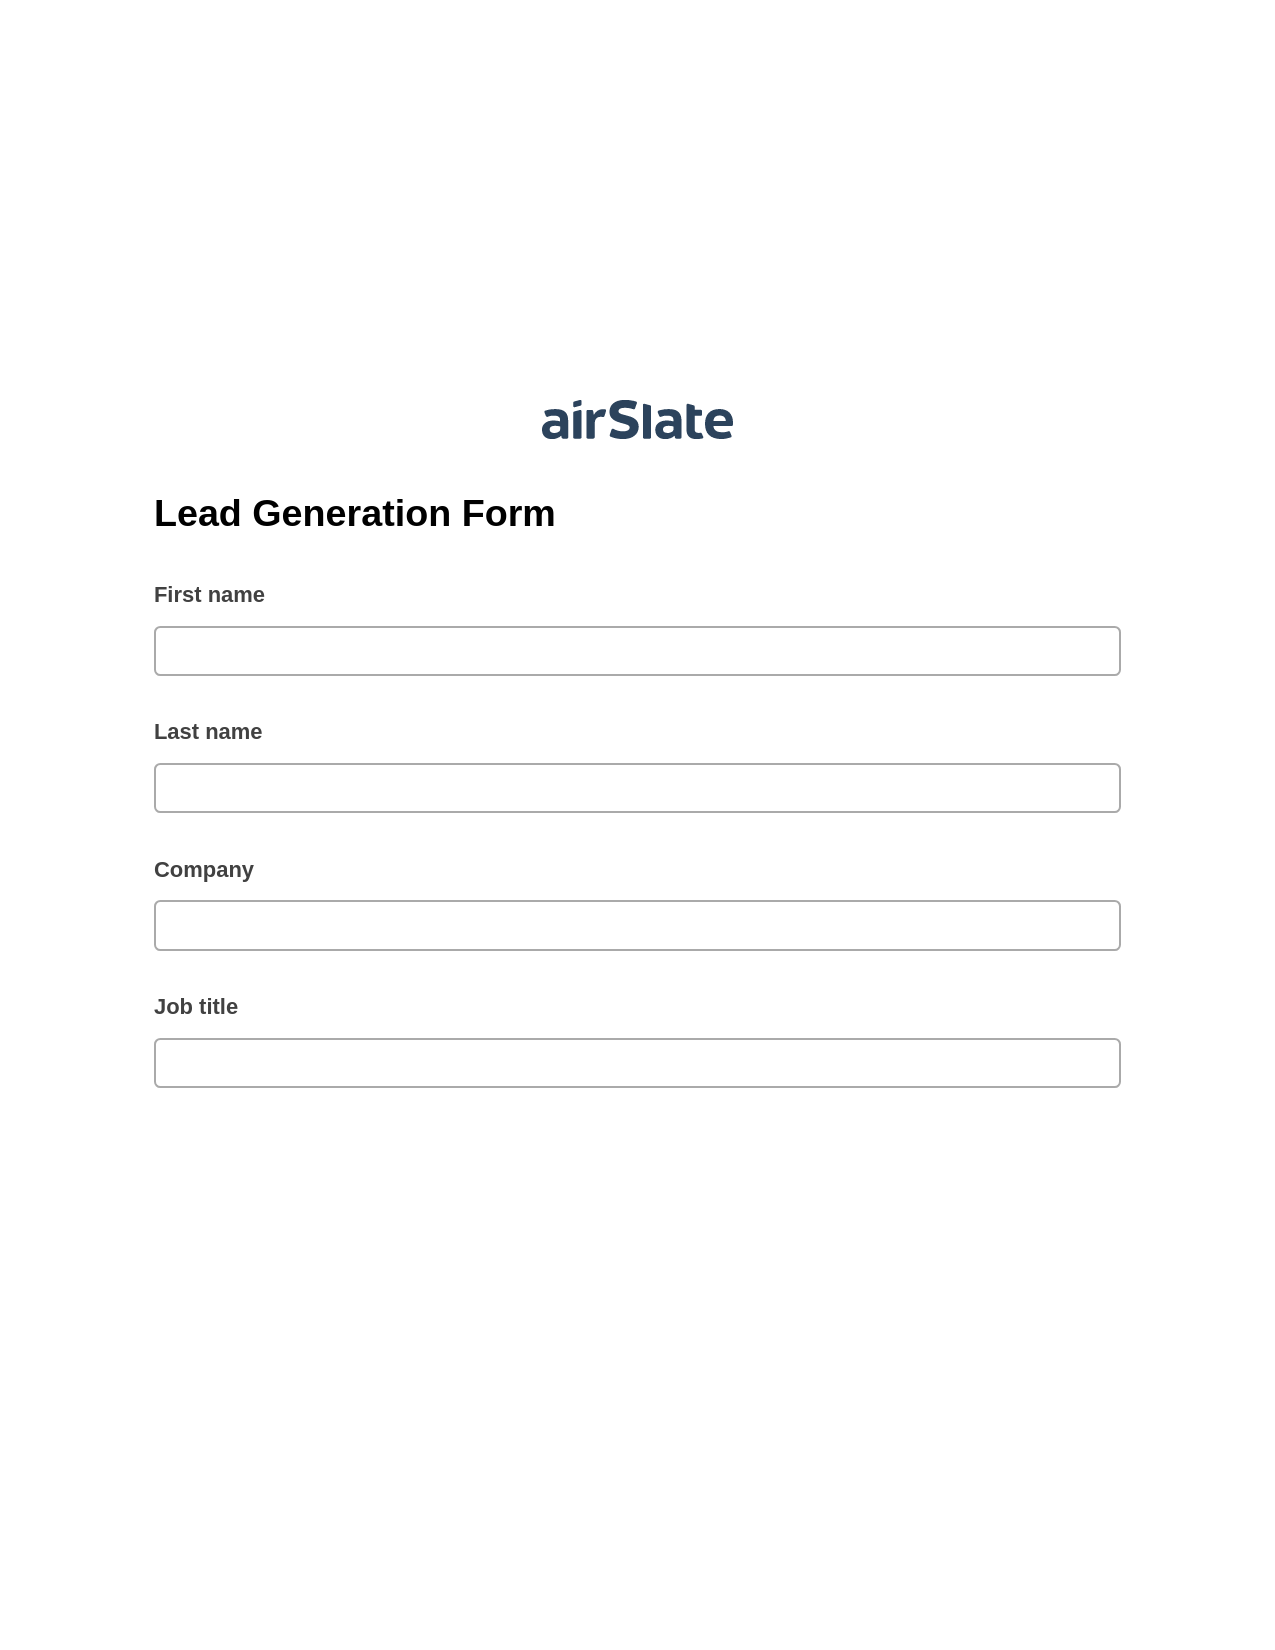 Multirole Lead Generation Form Pre-fill from Google Sheets Bot, Send a Slate to Salesforce Contact Bot, Archive to Google Drive Bot